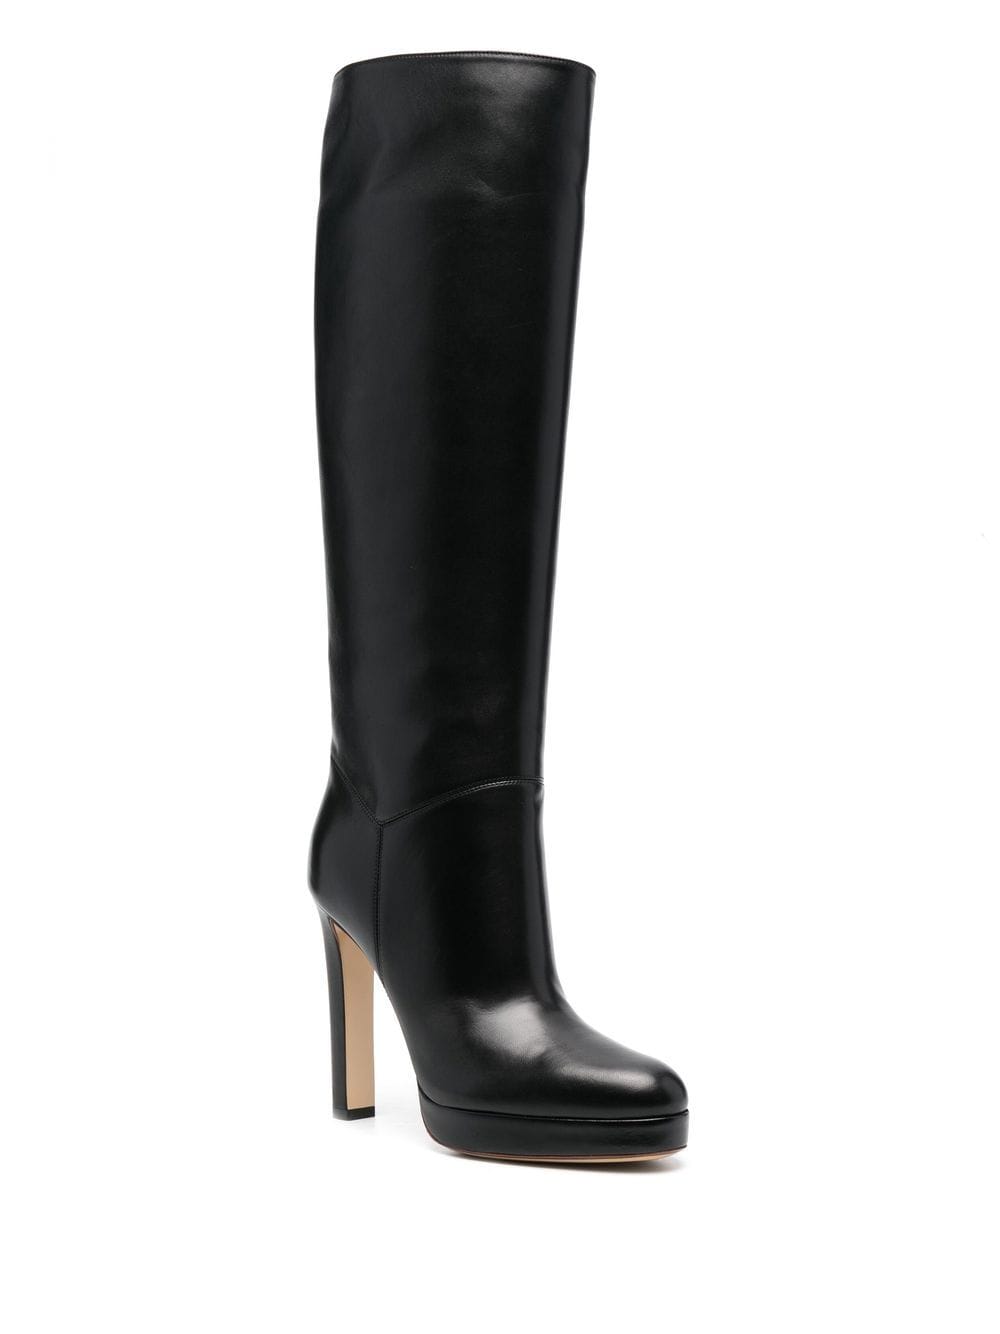 Francesco Russo High Heels Boots In Black Leather | ModeSens